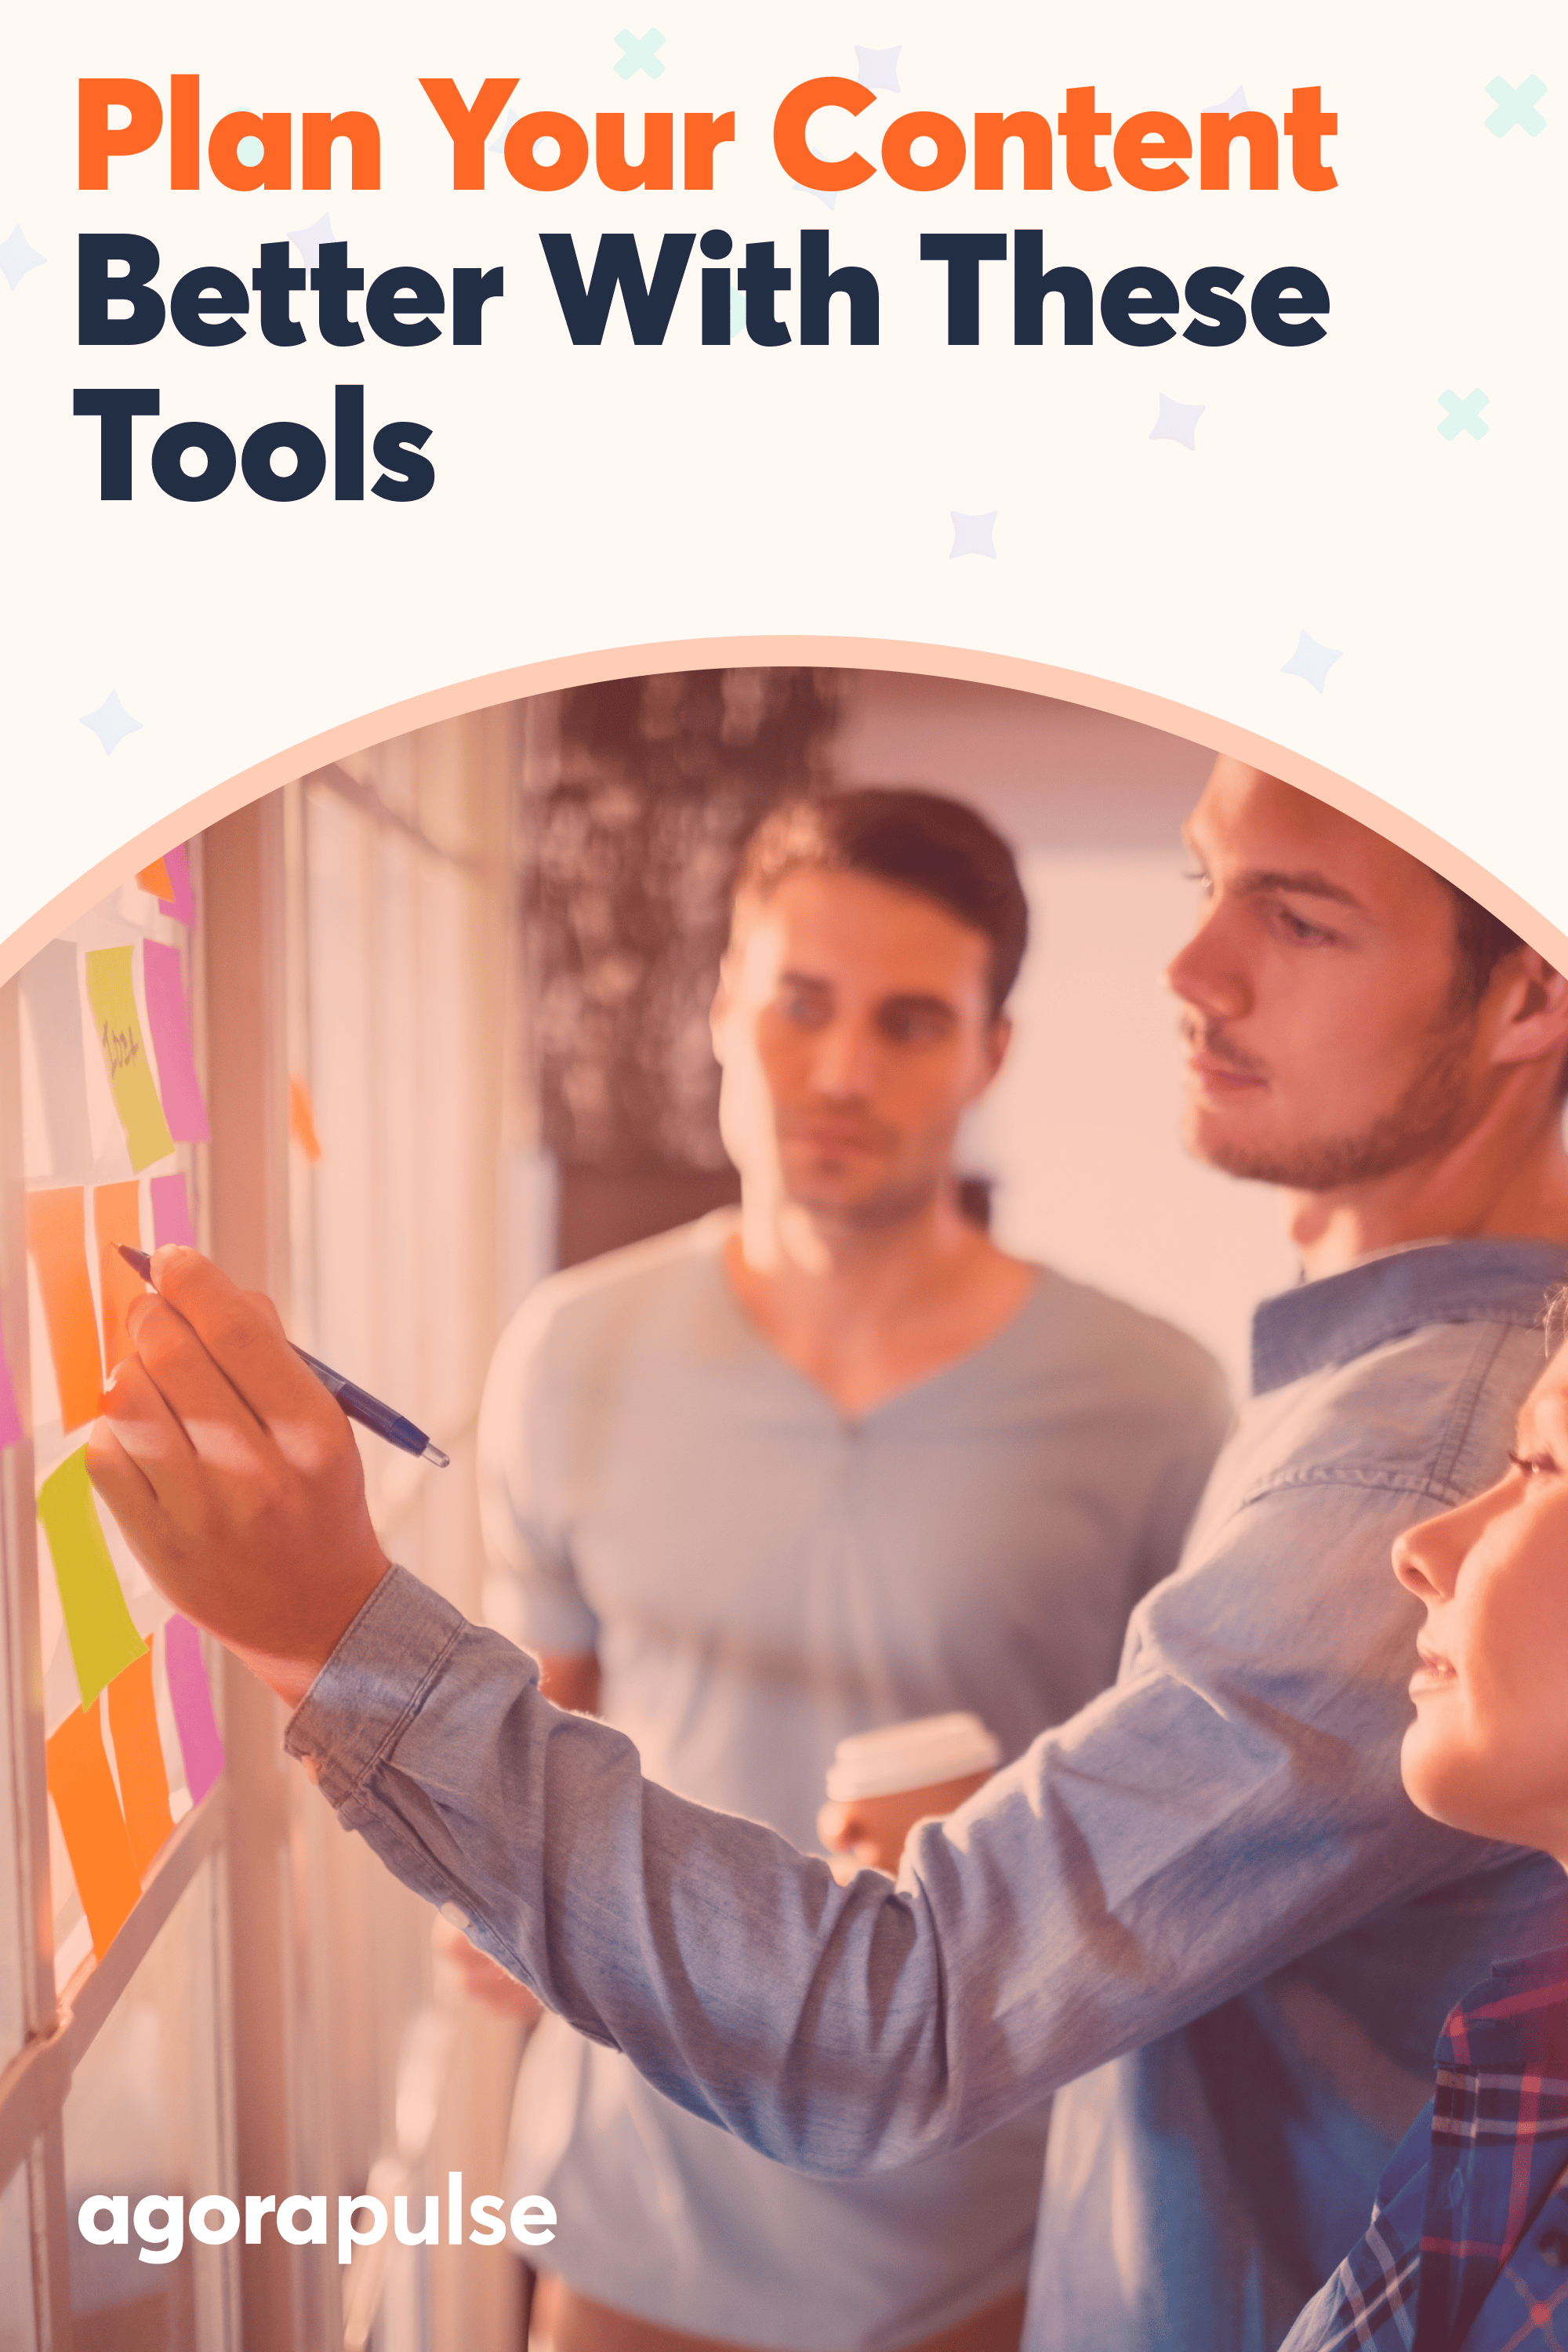 7 Tools to Help You Plan Your Content